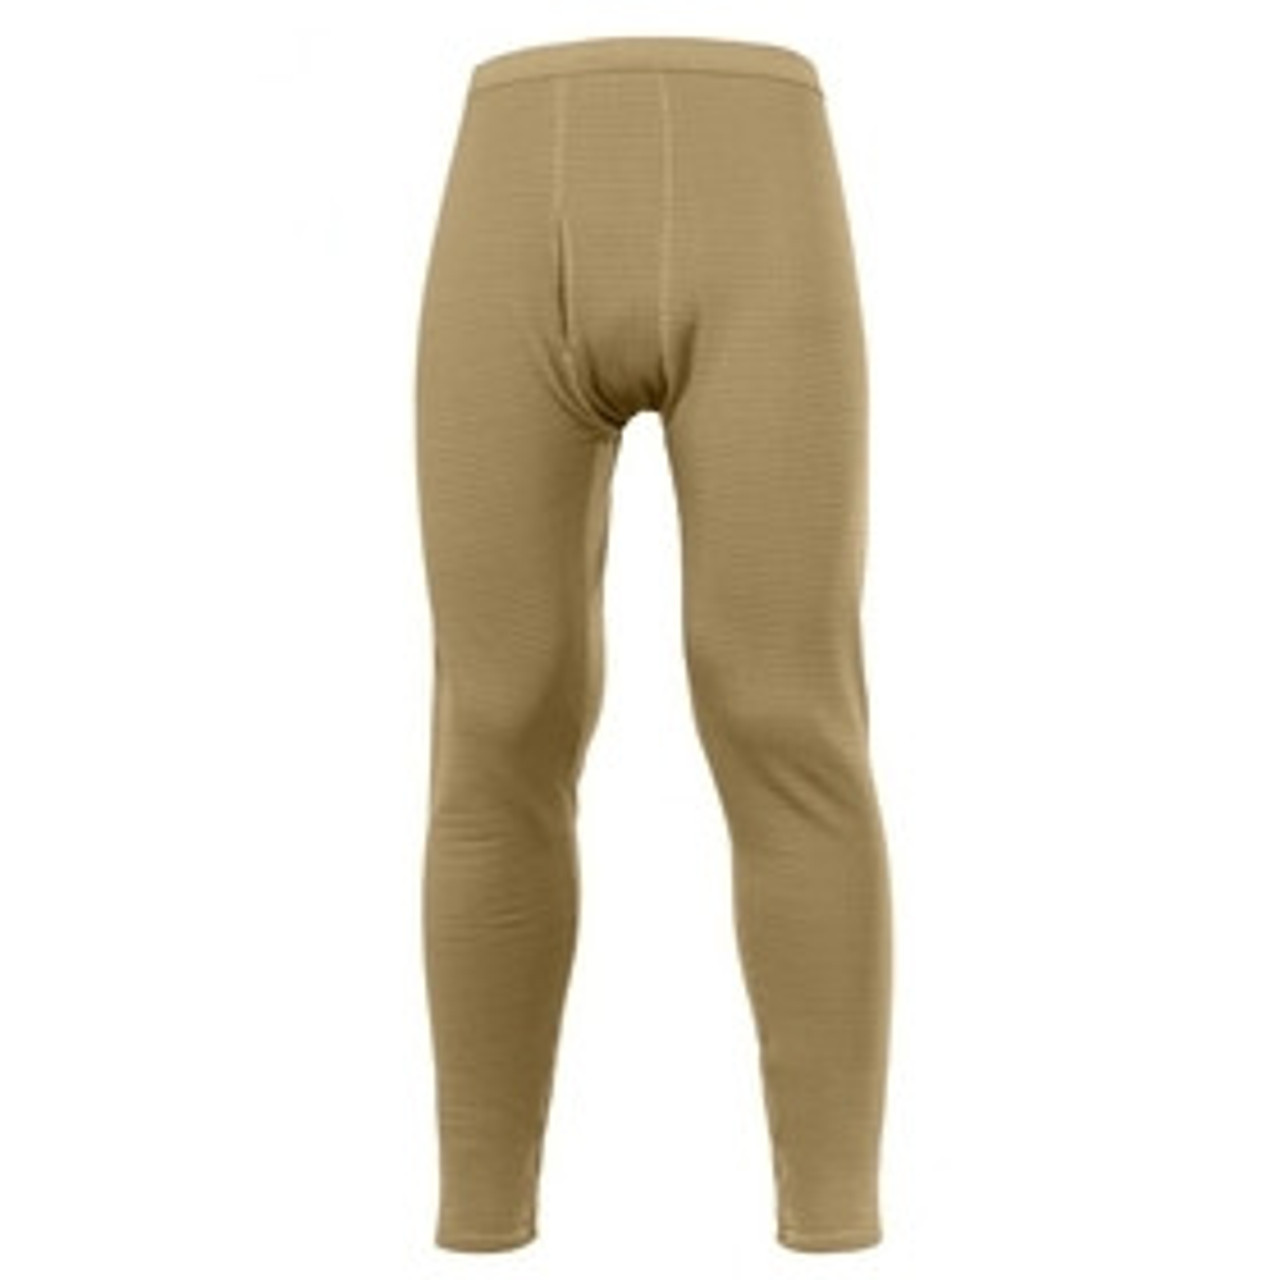 Polartec Military Army Cycle Thermal Underwear Sports Direct Set